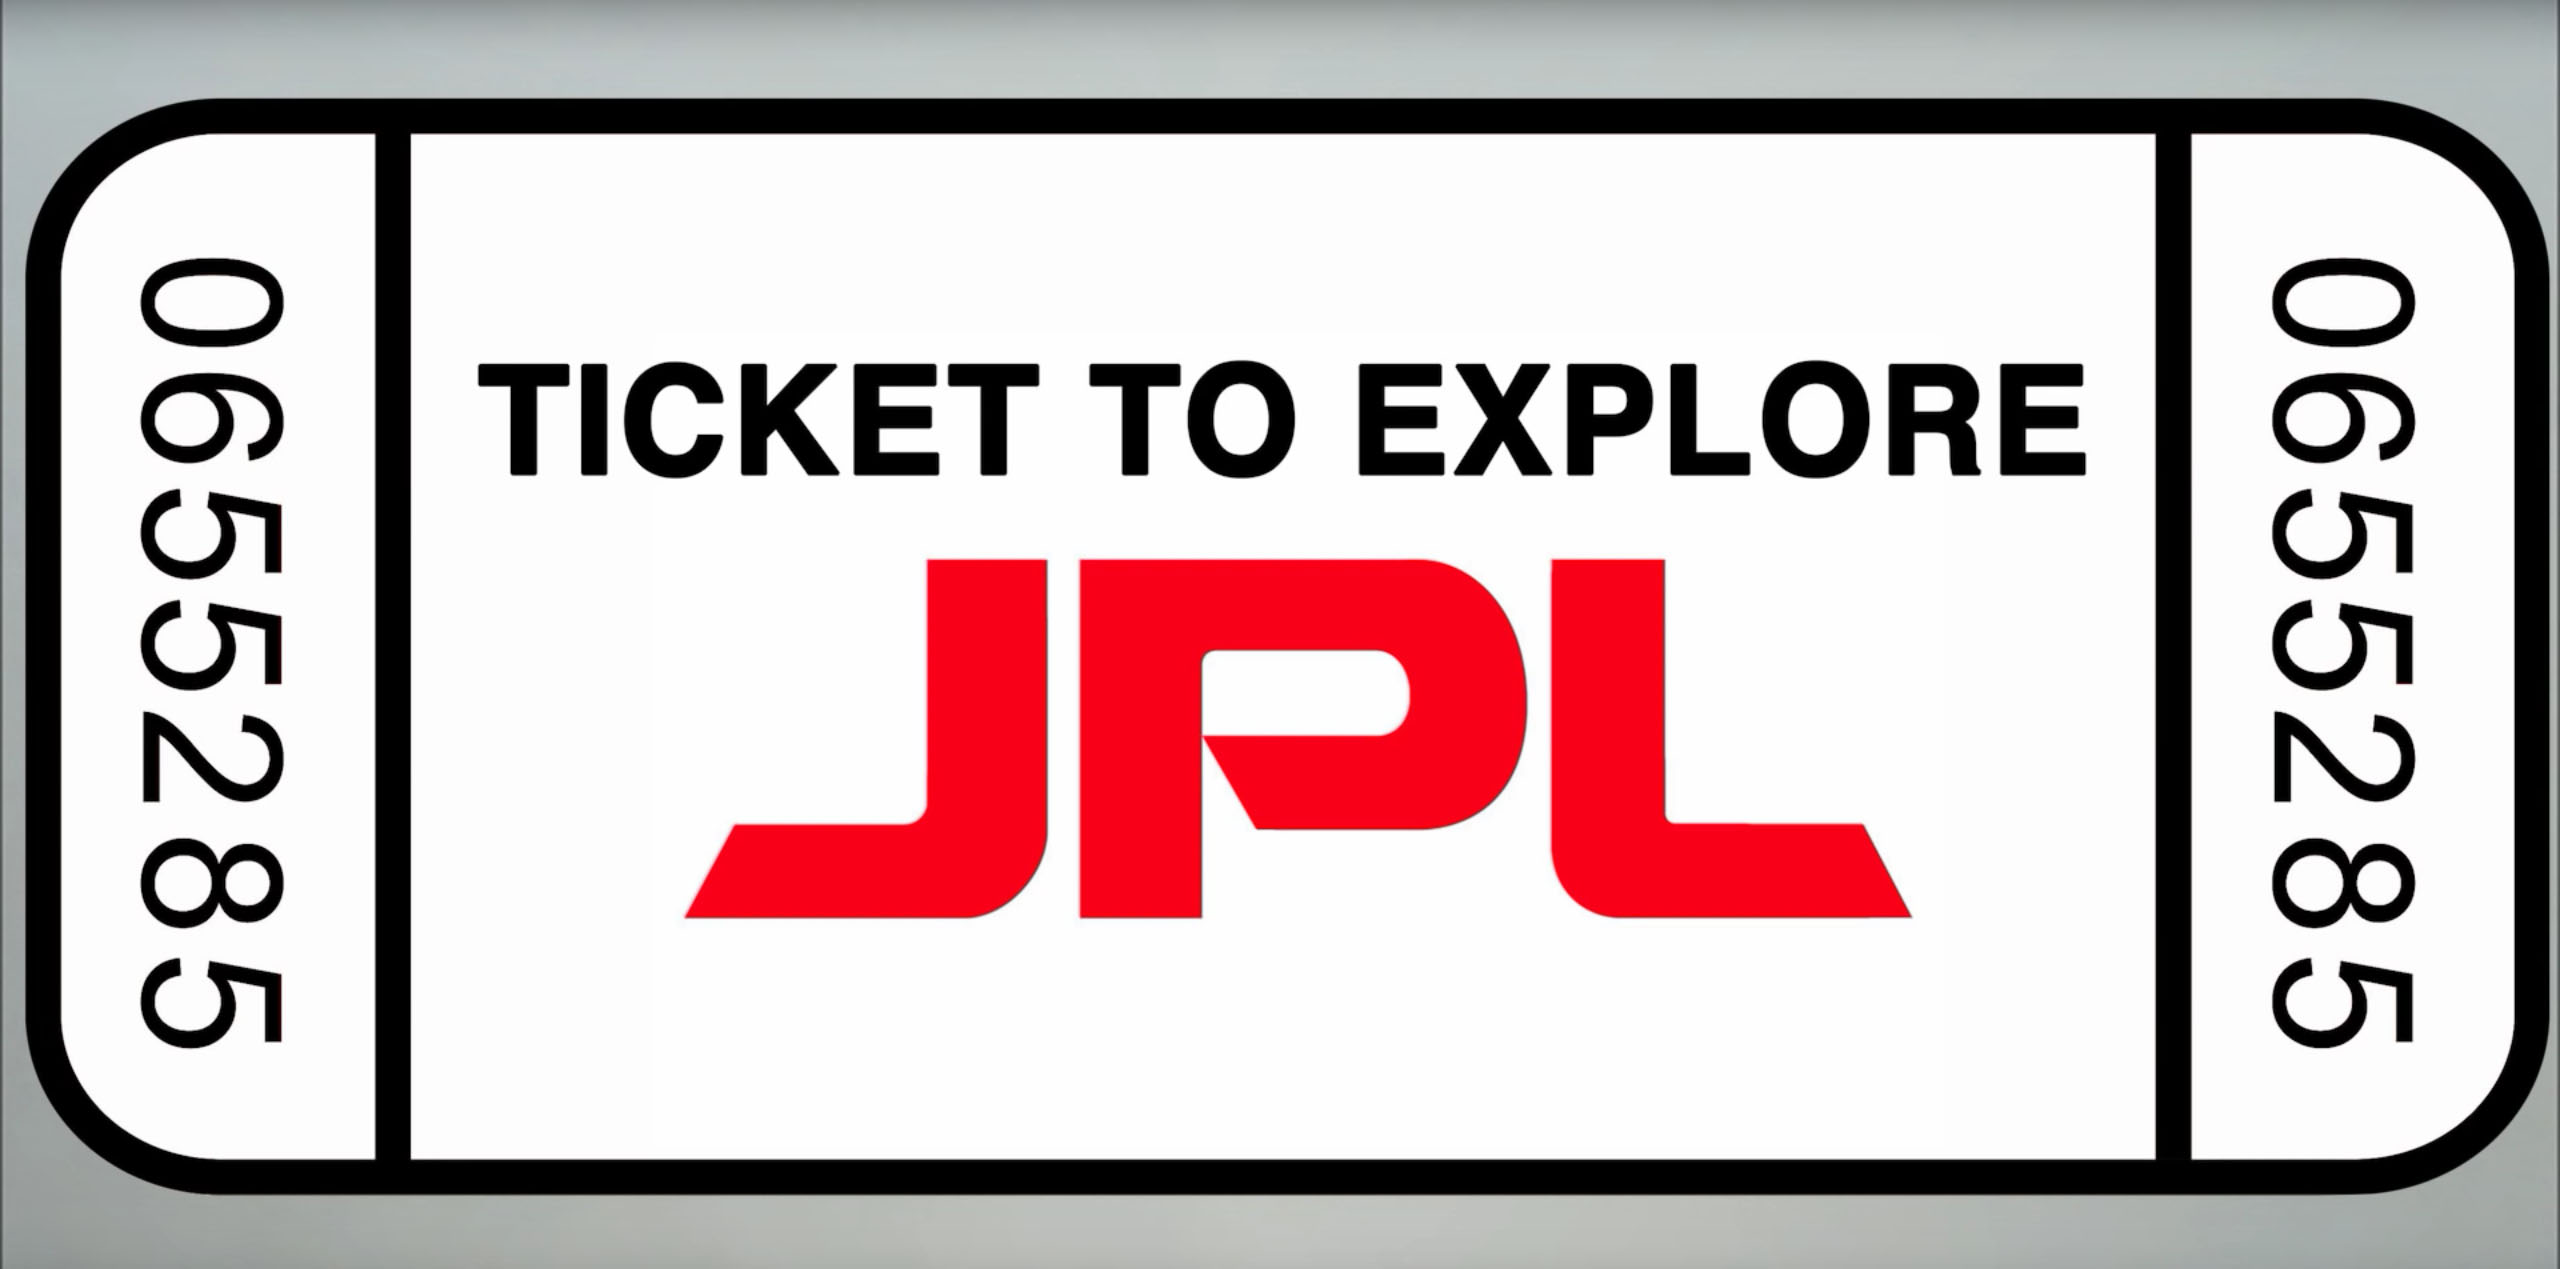 Ticket to Explore JPL - Introduction Video